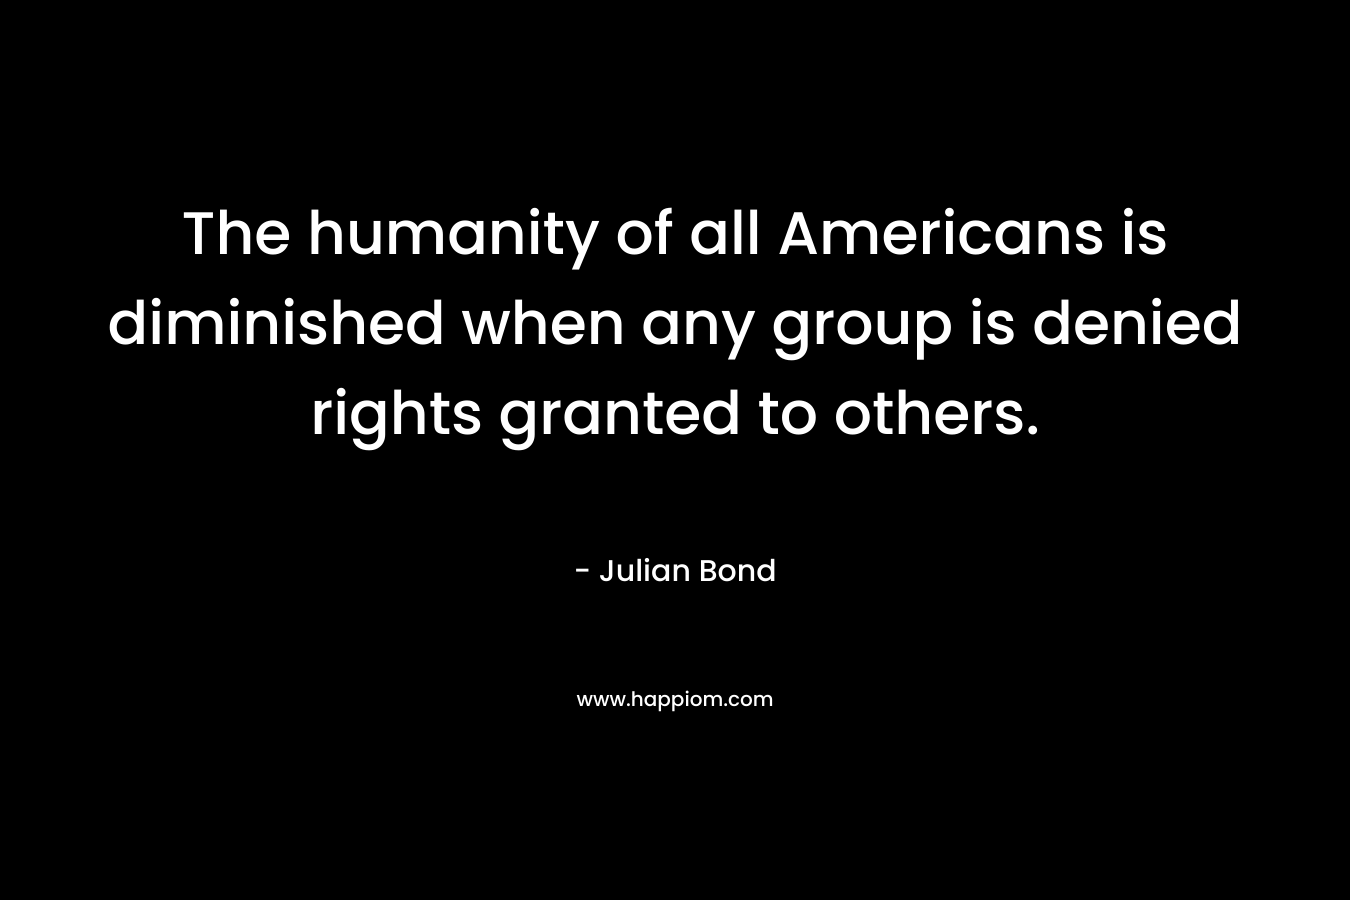 The humanity of all Americans is diminished when any group is denied rights granted to others. – Julian Bond